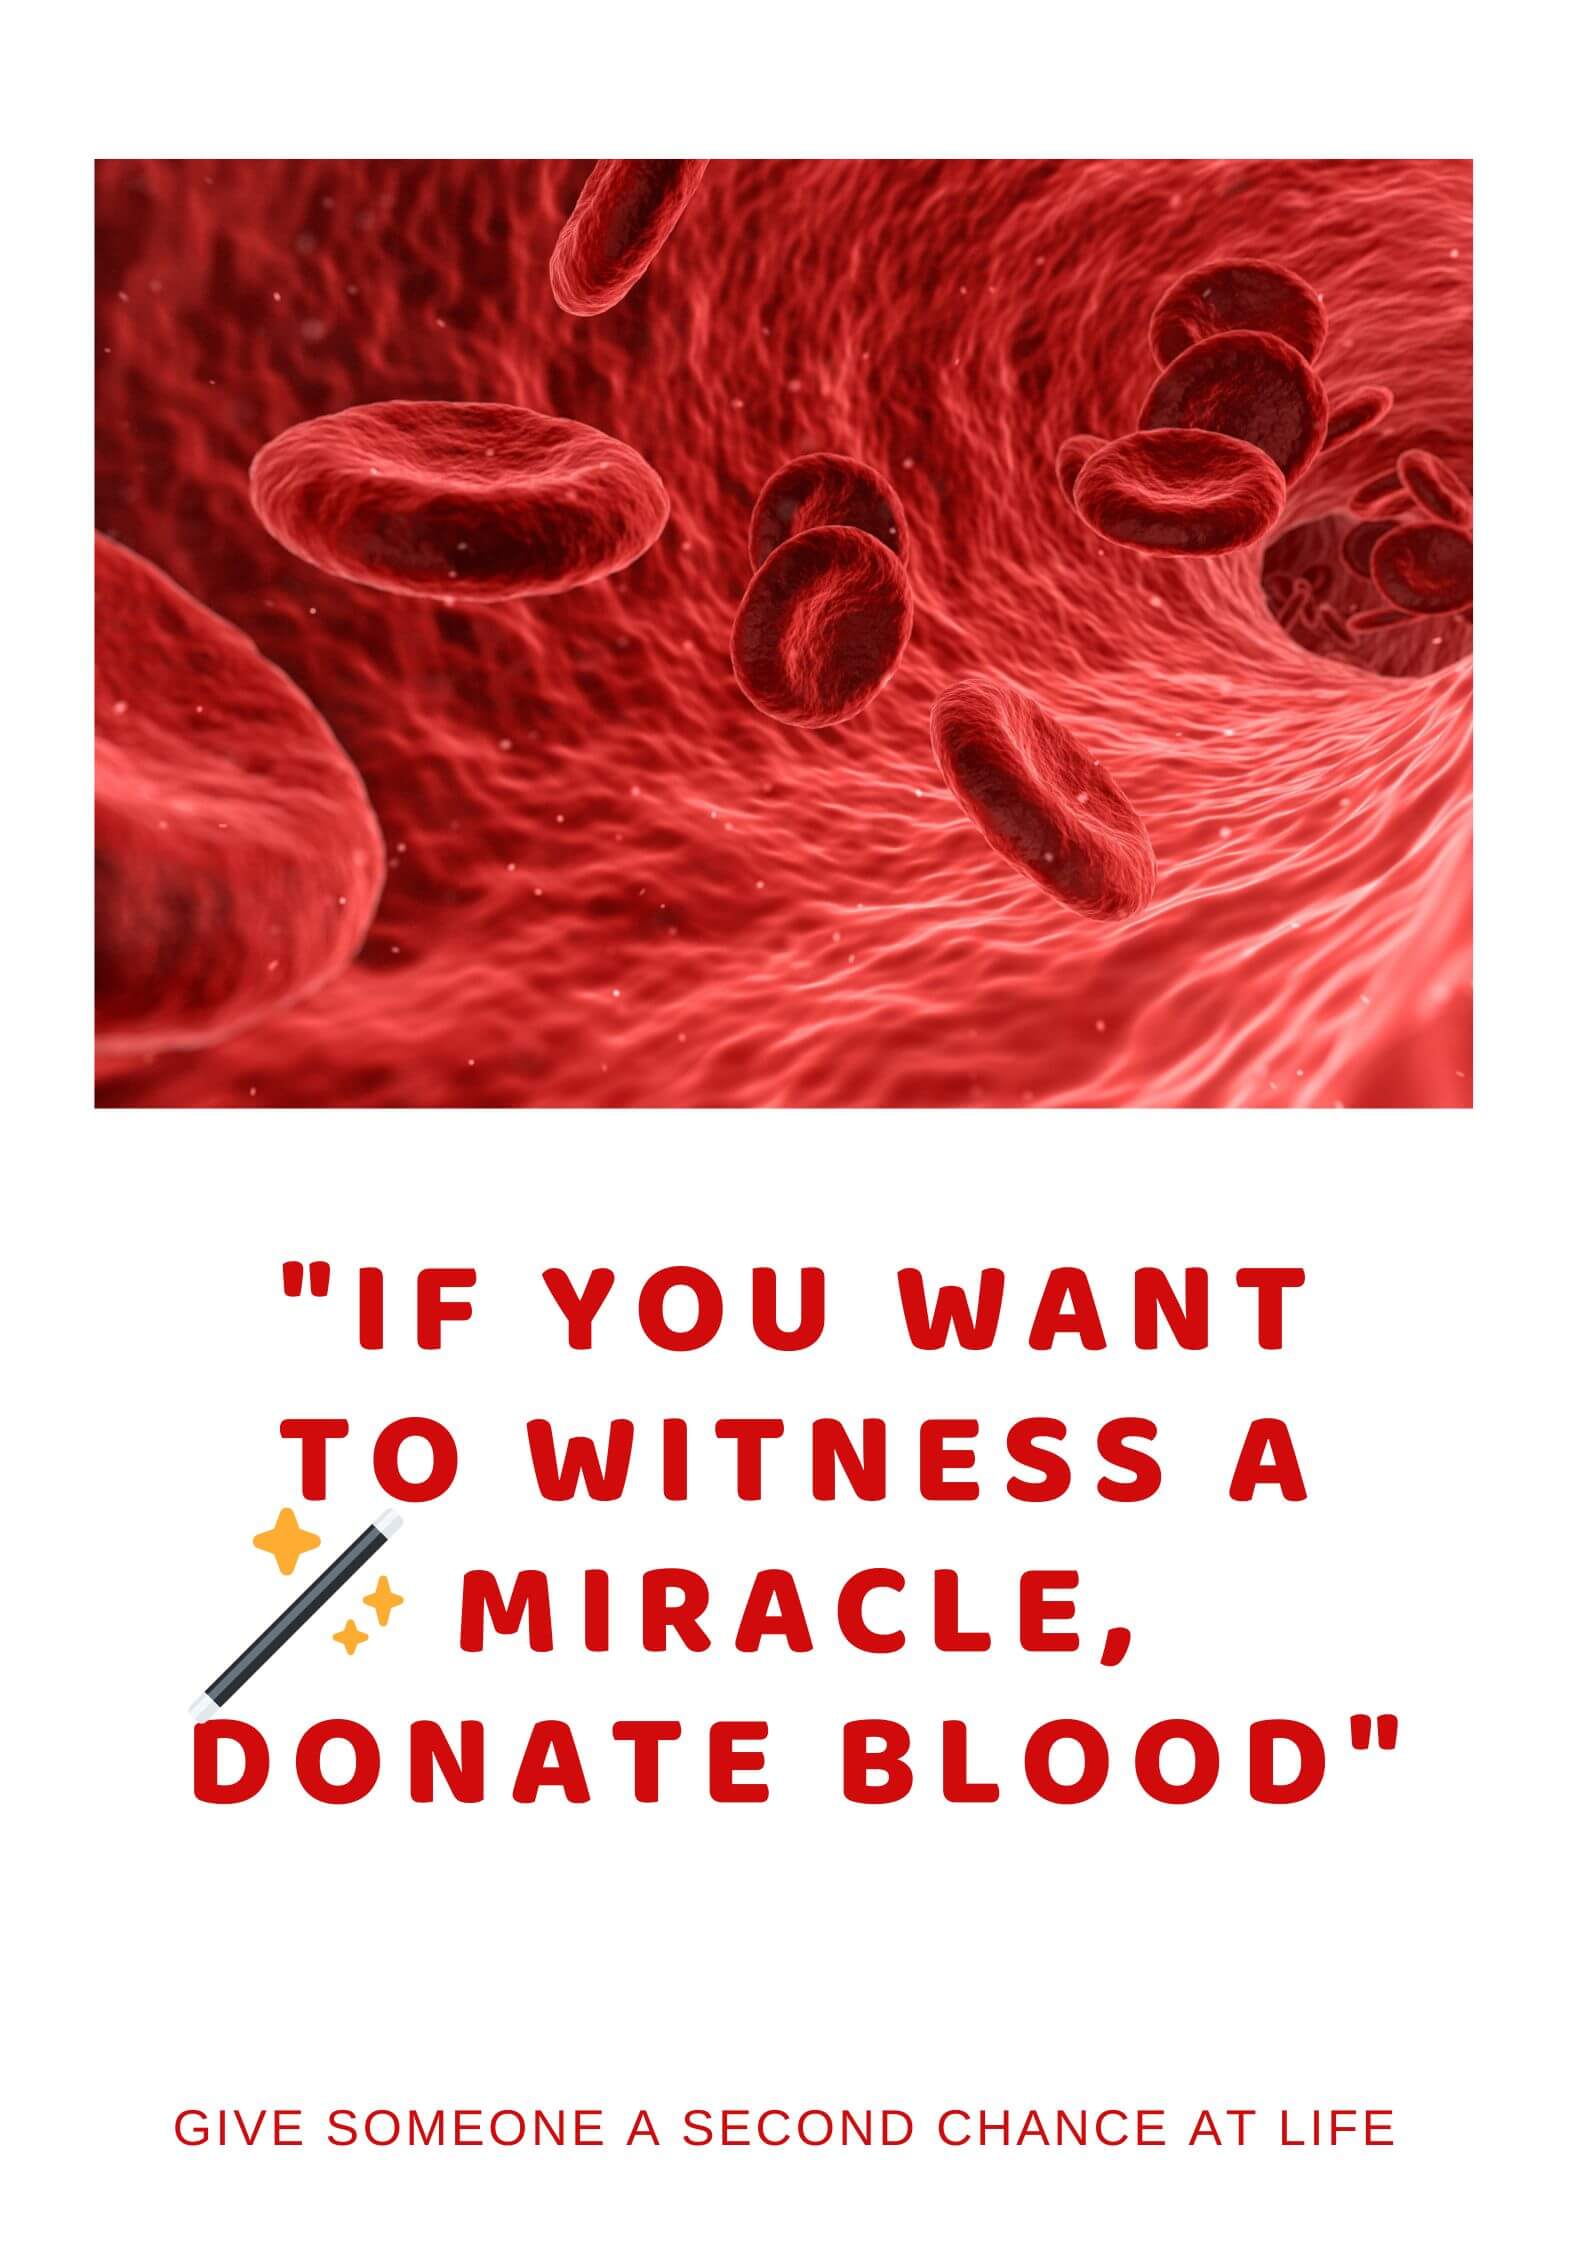 Blood Donation Day poster 9